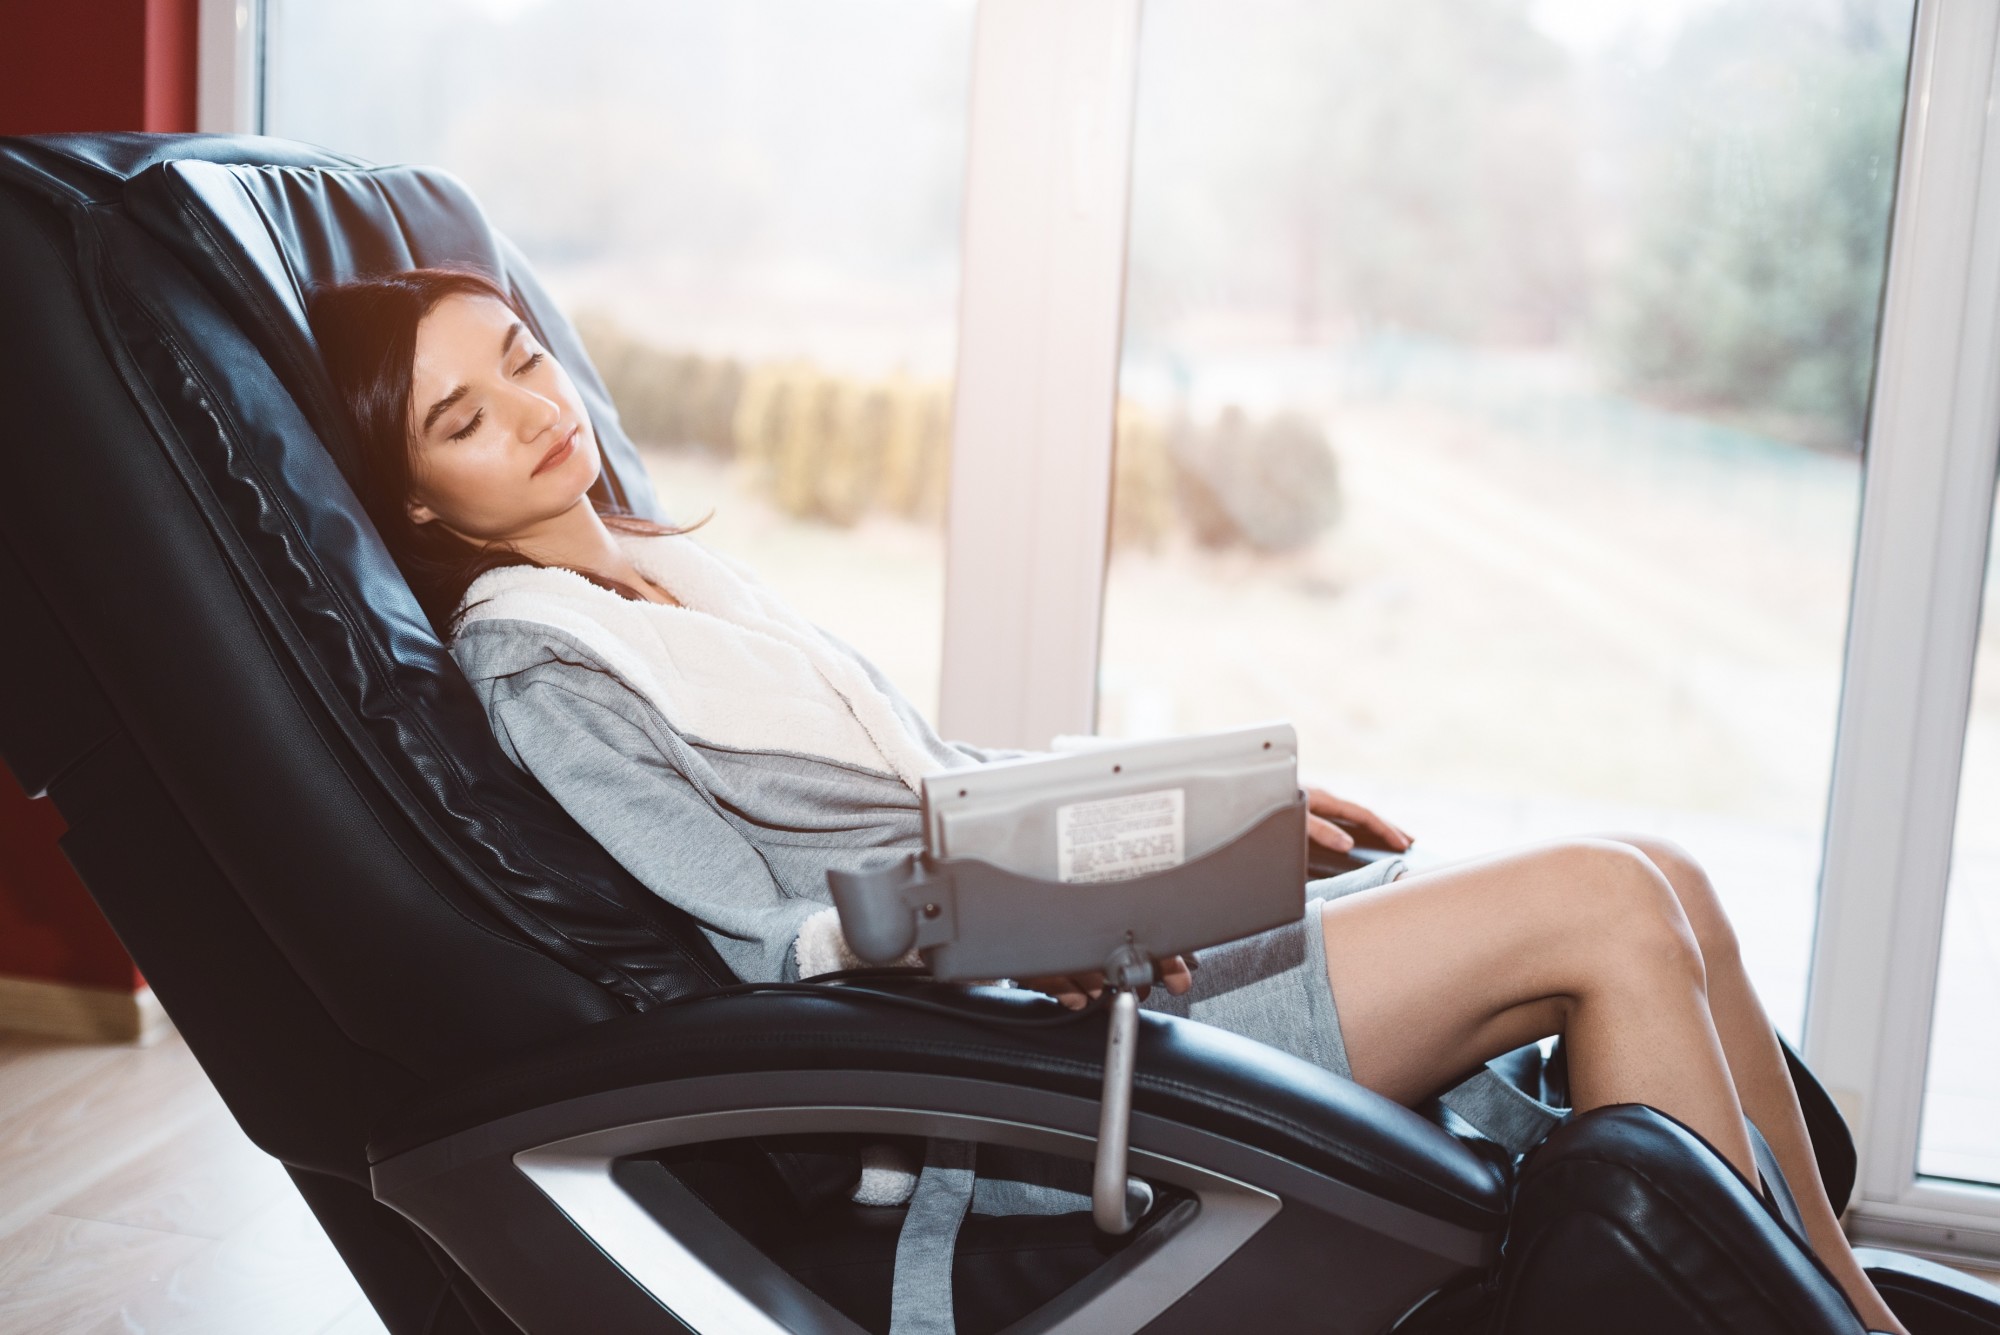 Are you thinking about purchasing a massage chair for yourself? Read this article to discover the top 5 benefits of massage chairs!